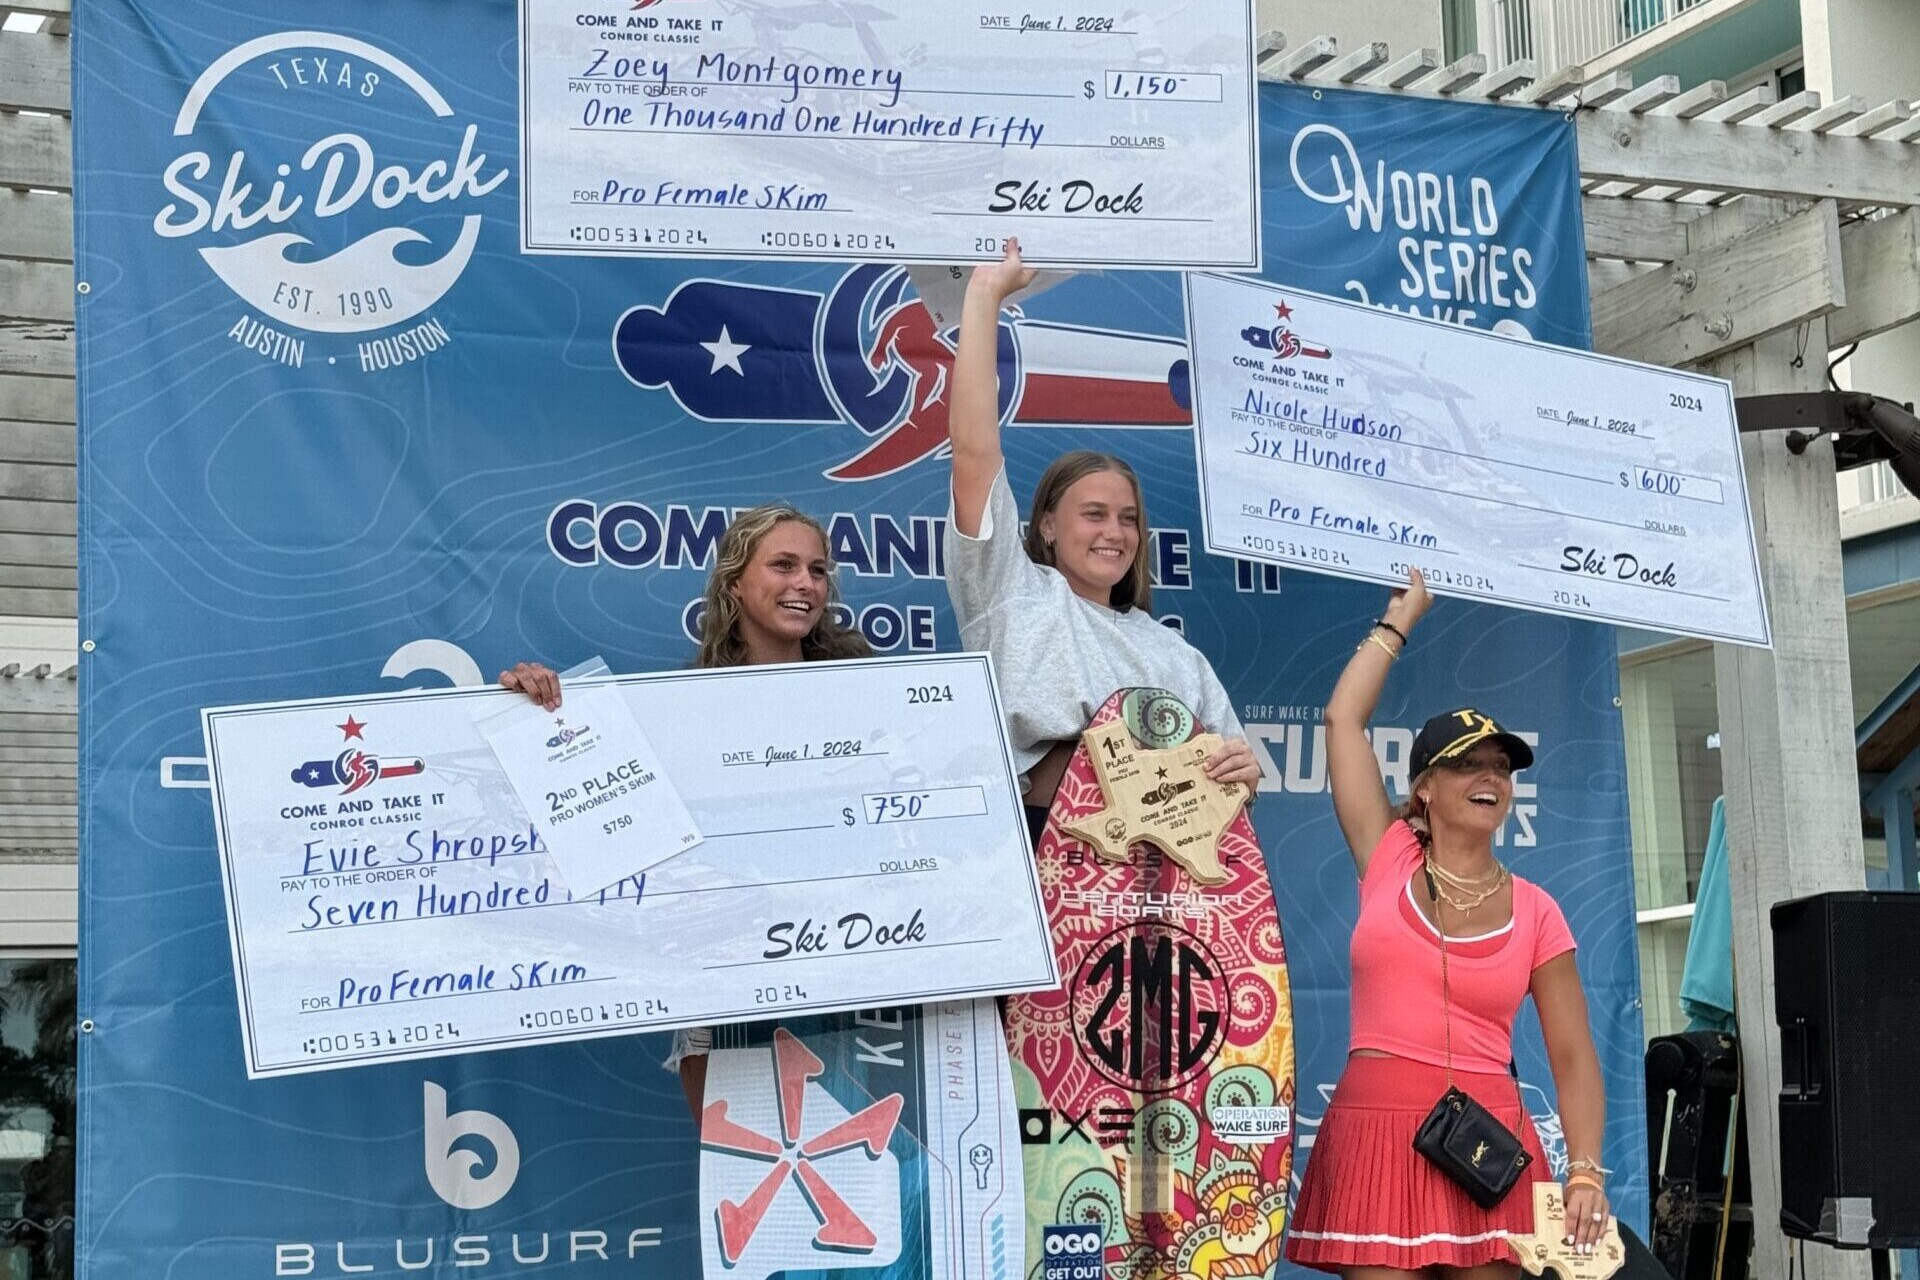 Three women pose on a winners' podium during the Conroe Classic Day 2 Finals, holding oversized prize checks and small awards, with one woman clutching a trophy. The backdrop displays logos and promotional signage from sponsors, including Centurion WSWS.